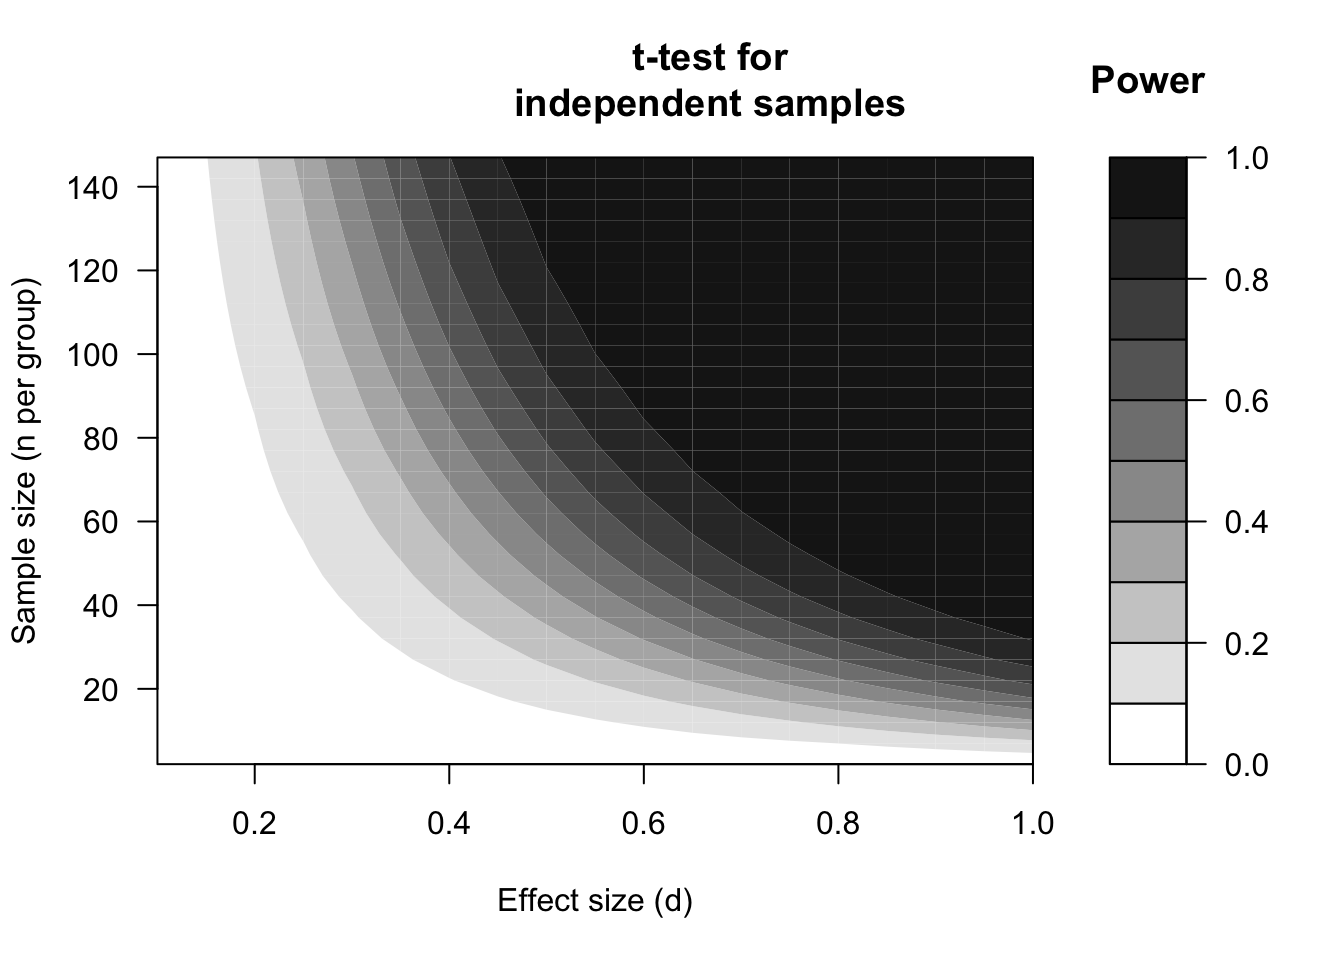 Power expressed in contours (see shading), dependent on the standardised effect size (d) and sample size according to a two-sided t-test for unpaired, independent observations, with two-sided significance level alpha=.01.